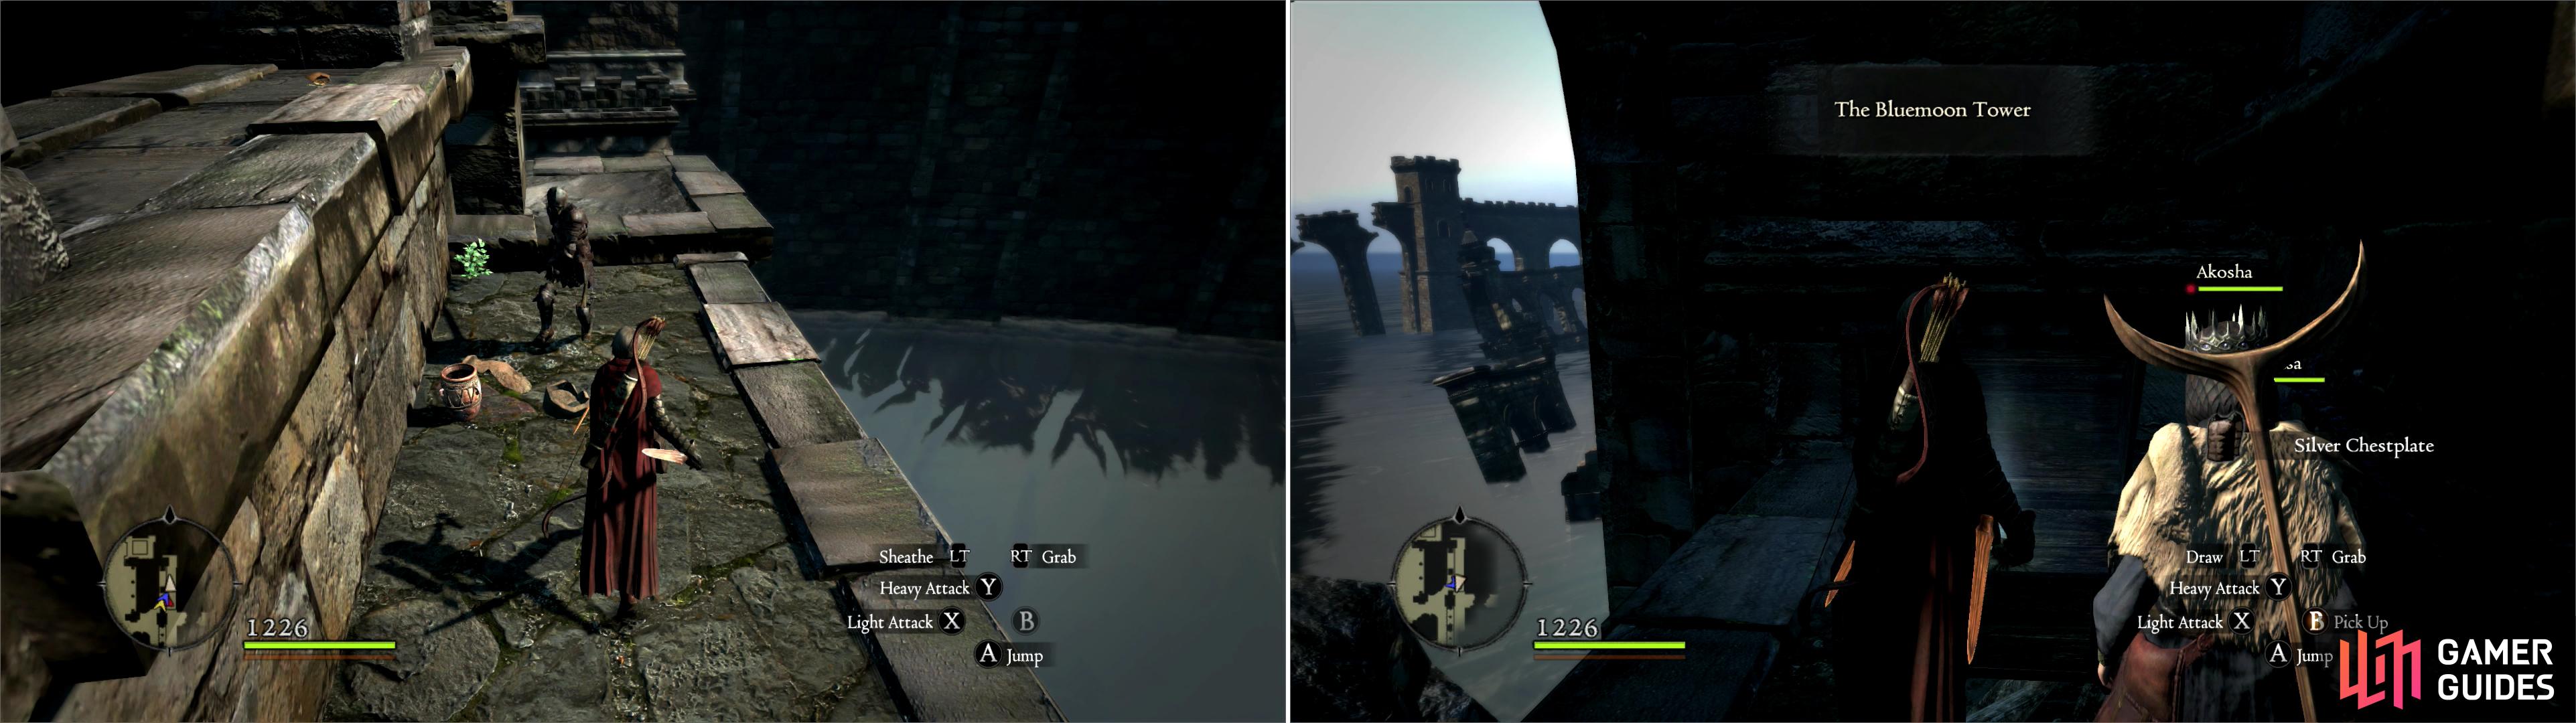 Undead will pester you on the lower levels of Bluemoon Tower (left), but the treasure within is worth the trouble of eradicating them (right).